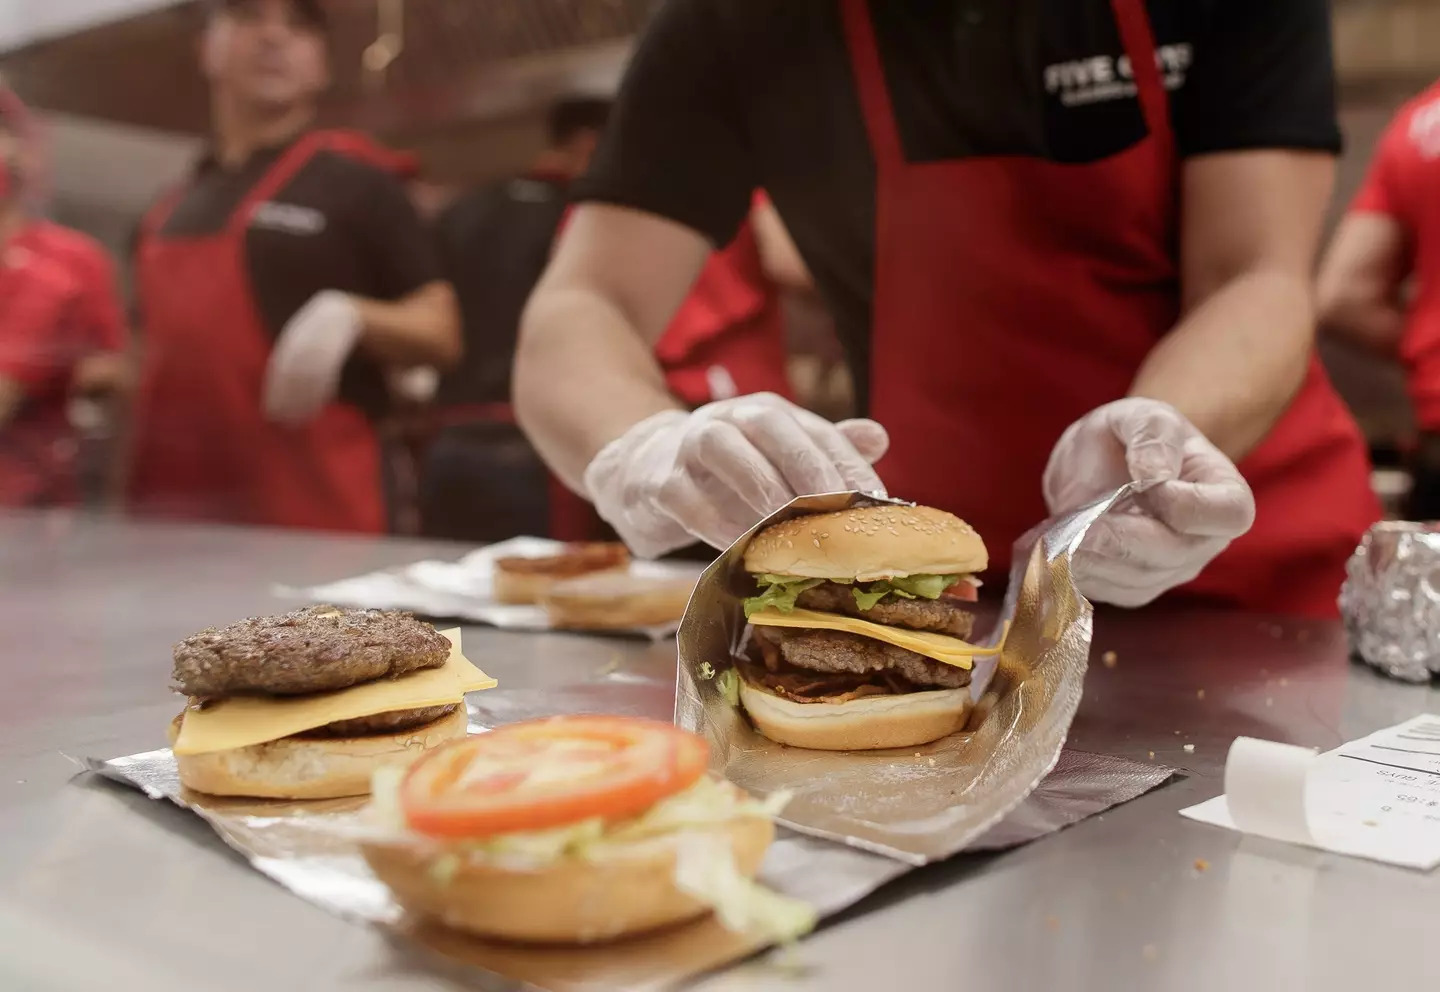 Five Guys insists that it only uses fresh ingredients.